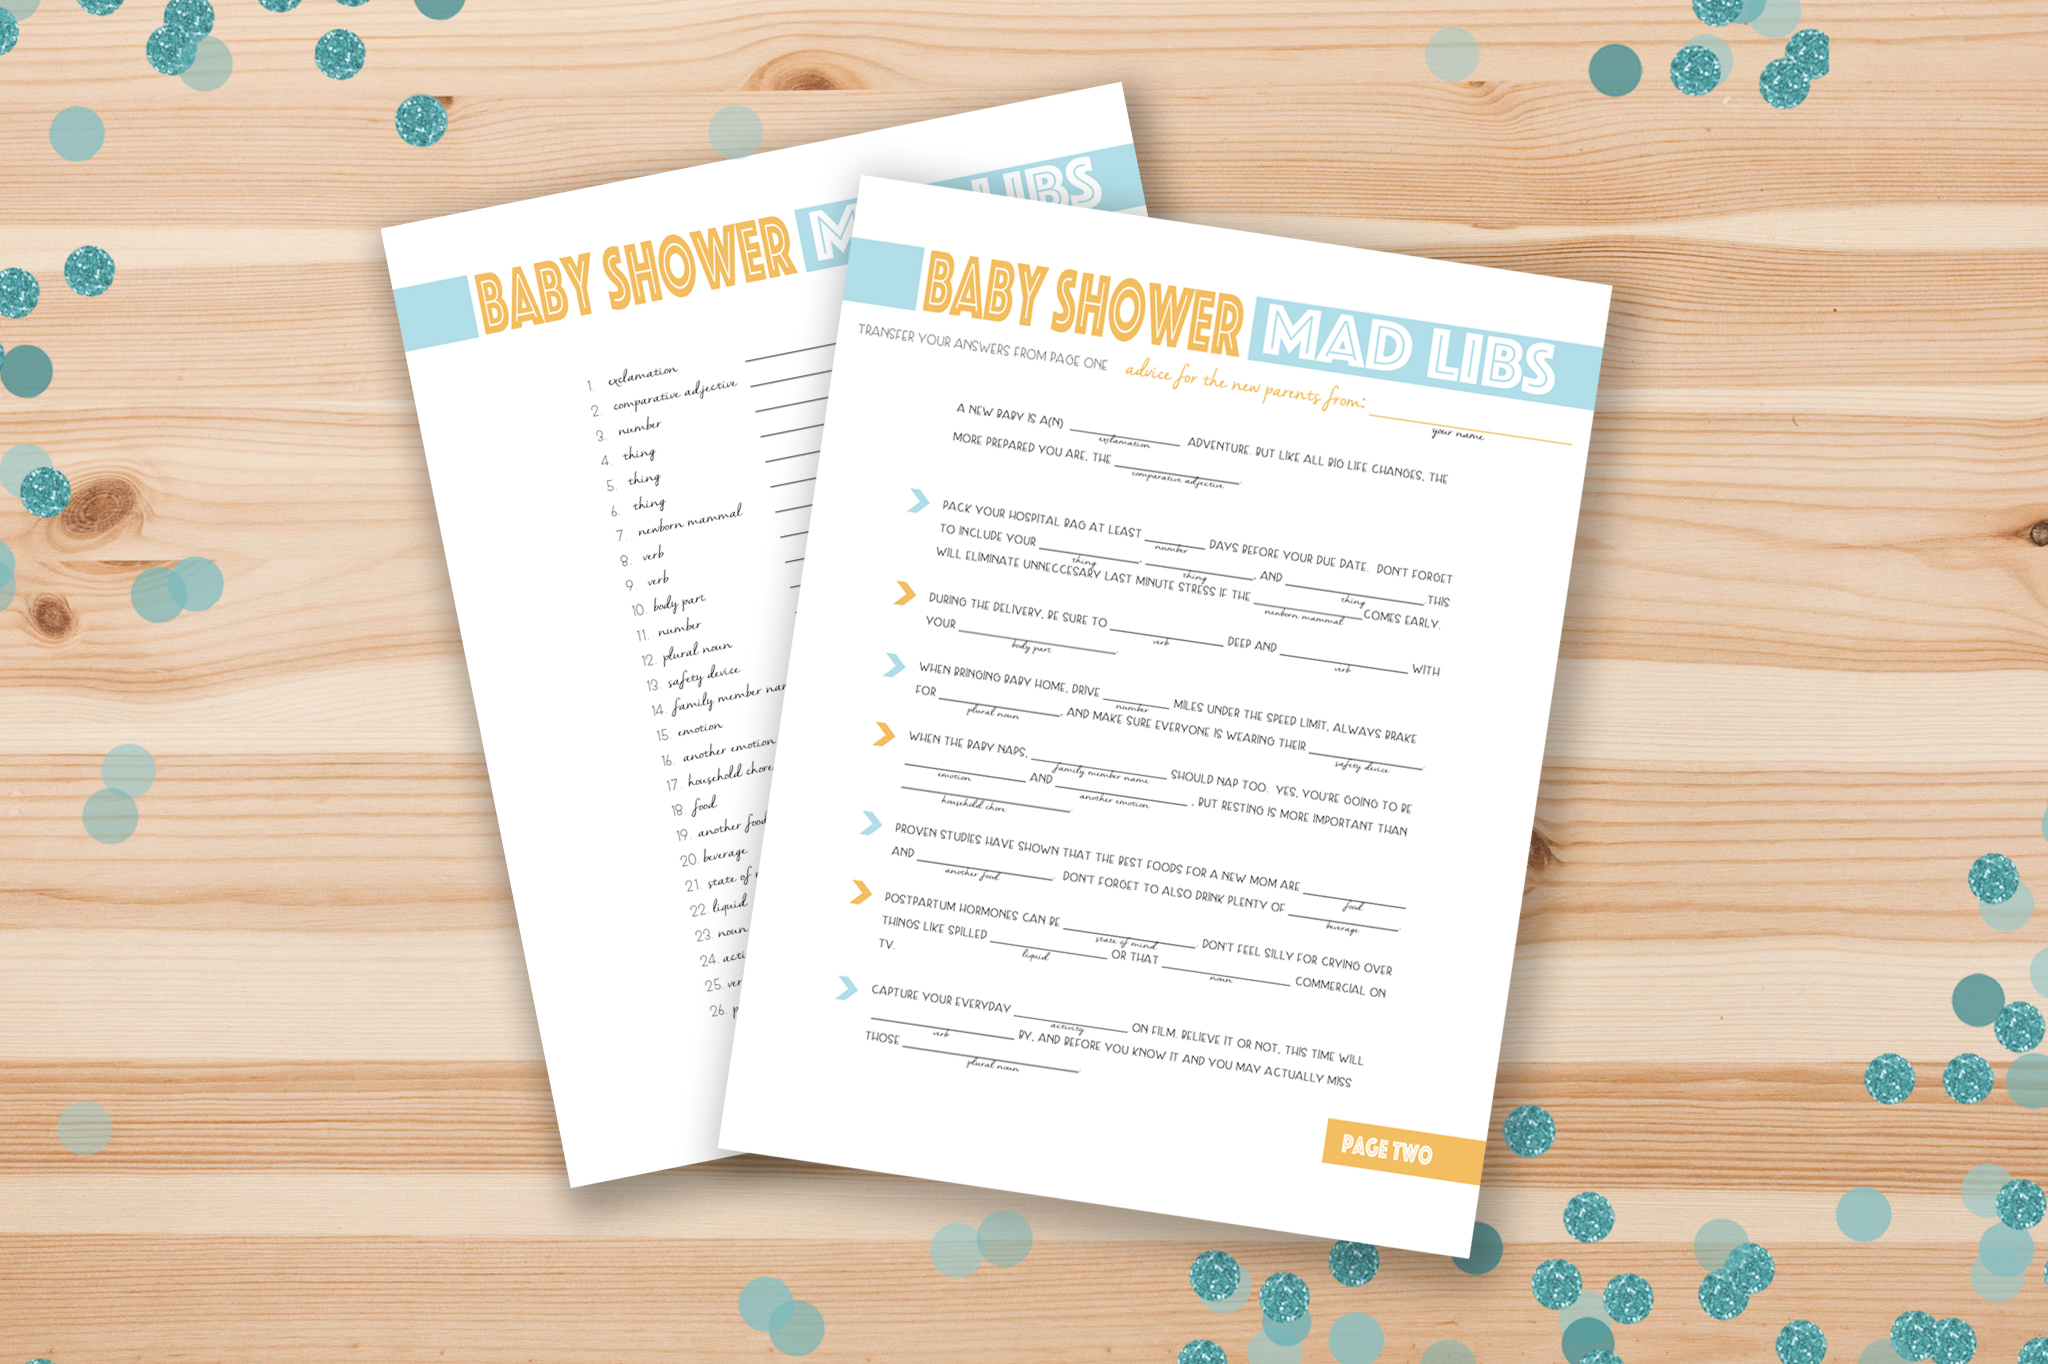 Free Printable Baby Shower Mad Libs - Project Nursery - Baby Shower Mad Libs Printable Free